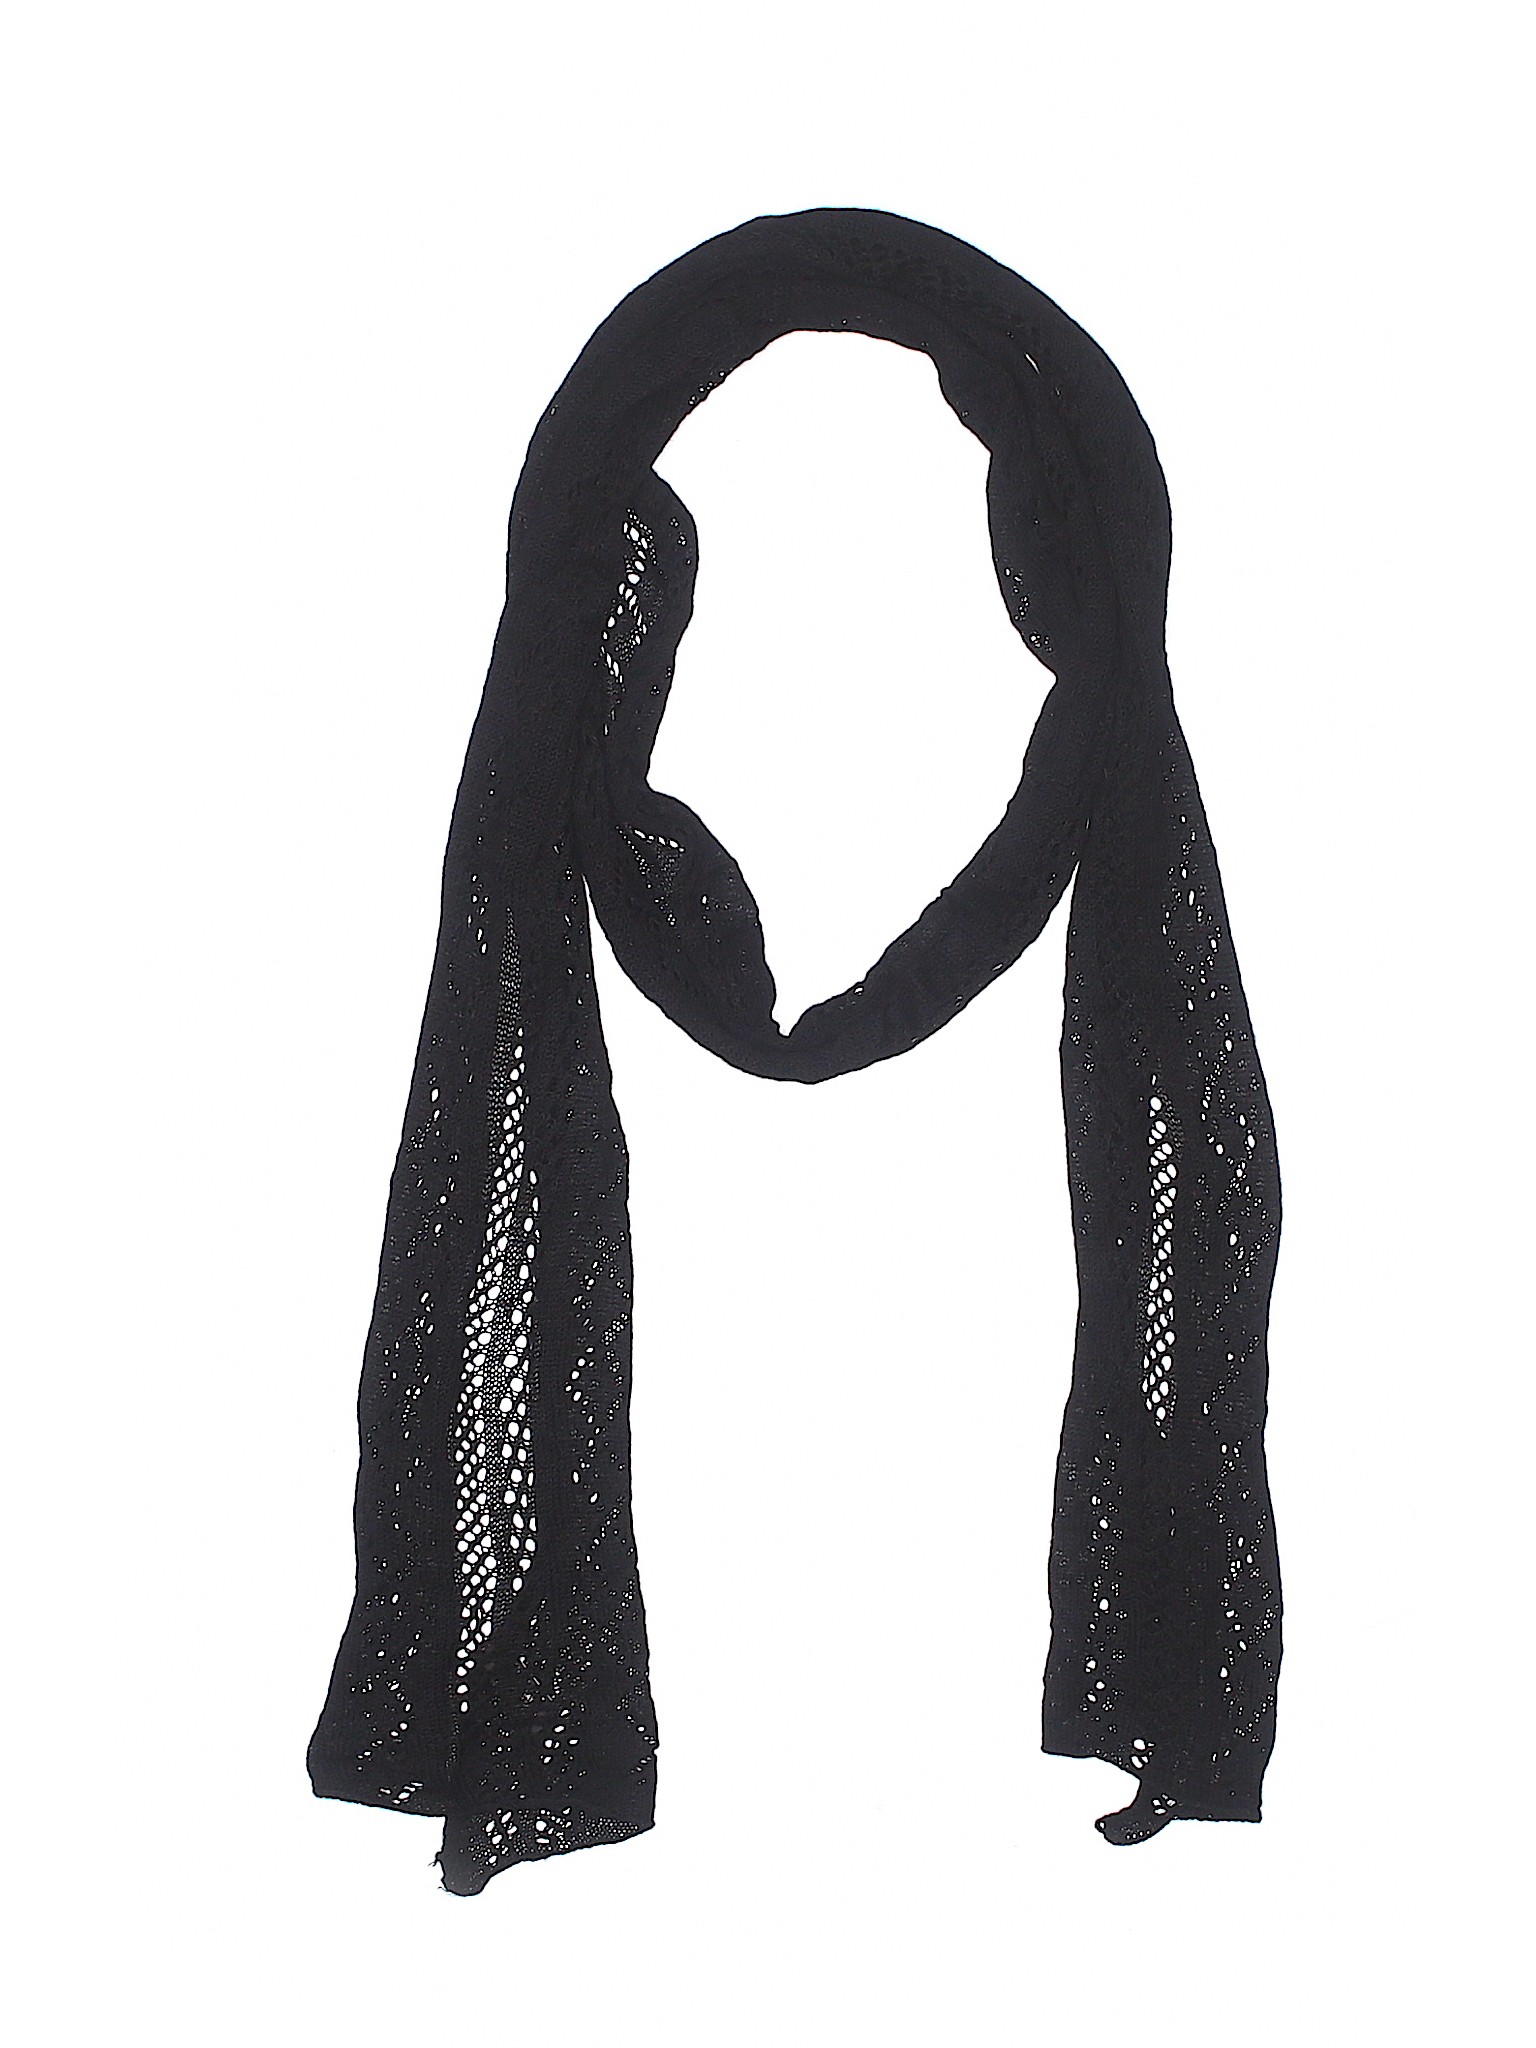 The Limited Women Black Scarf One Size | eBay